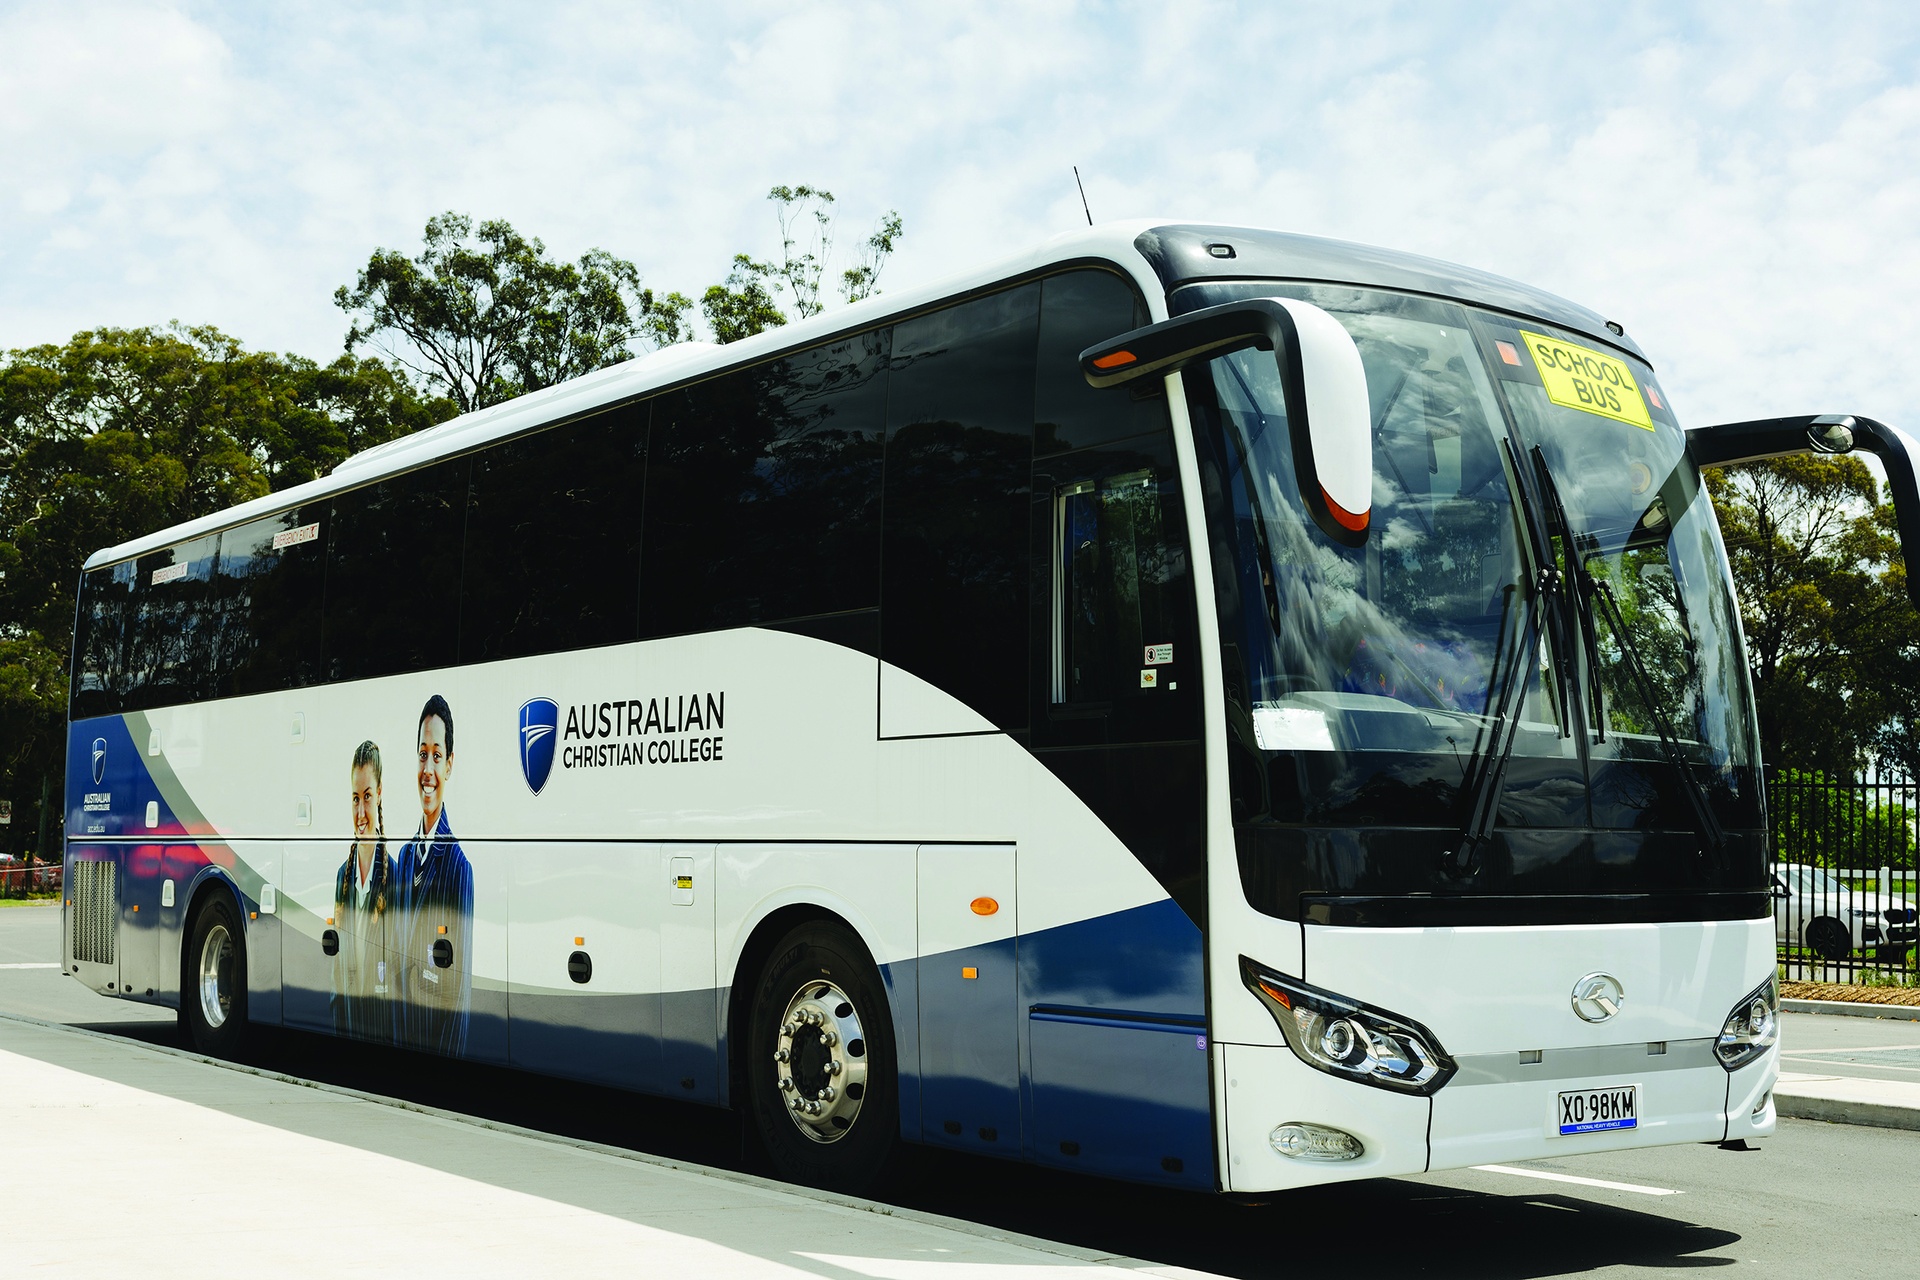 ACC Hobart private bus with decal of students on the side